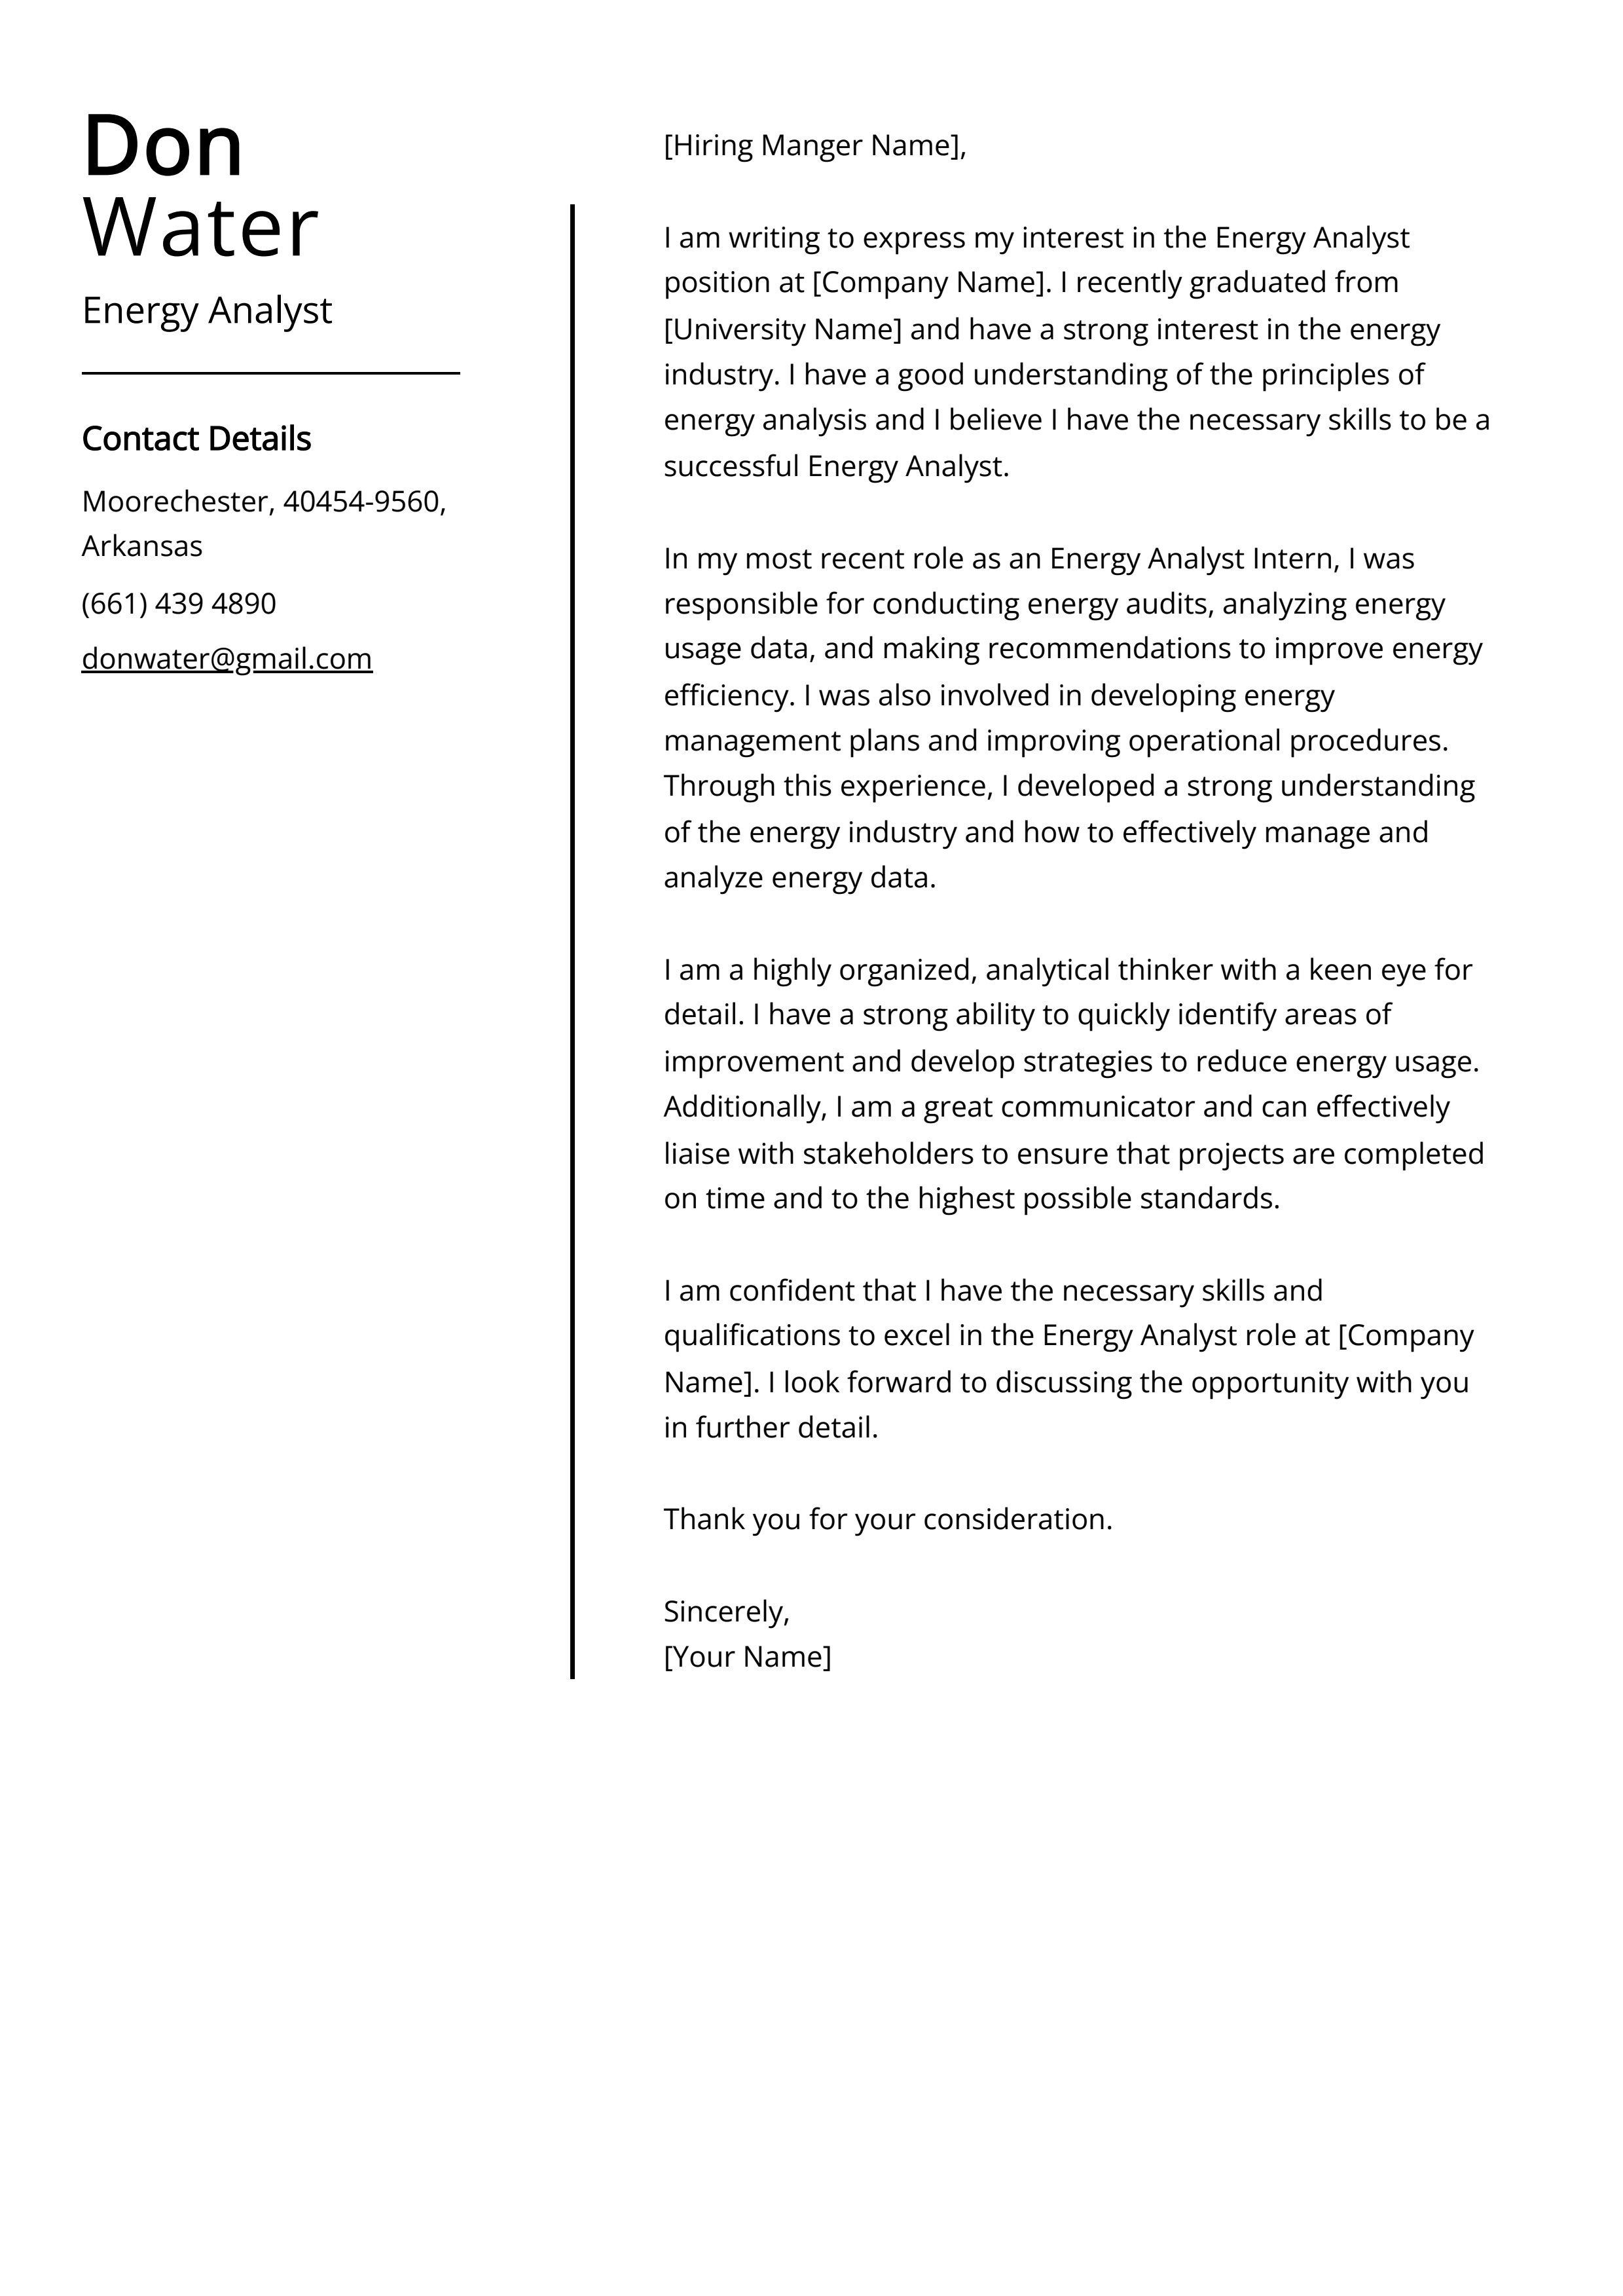 Energy Analyst Cover Letter Example